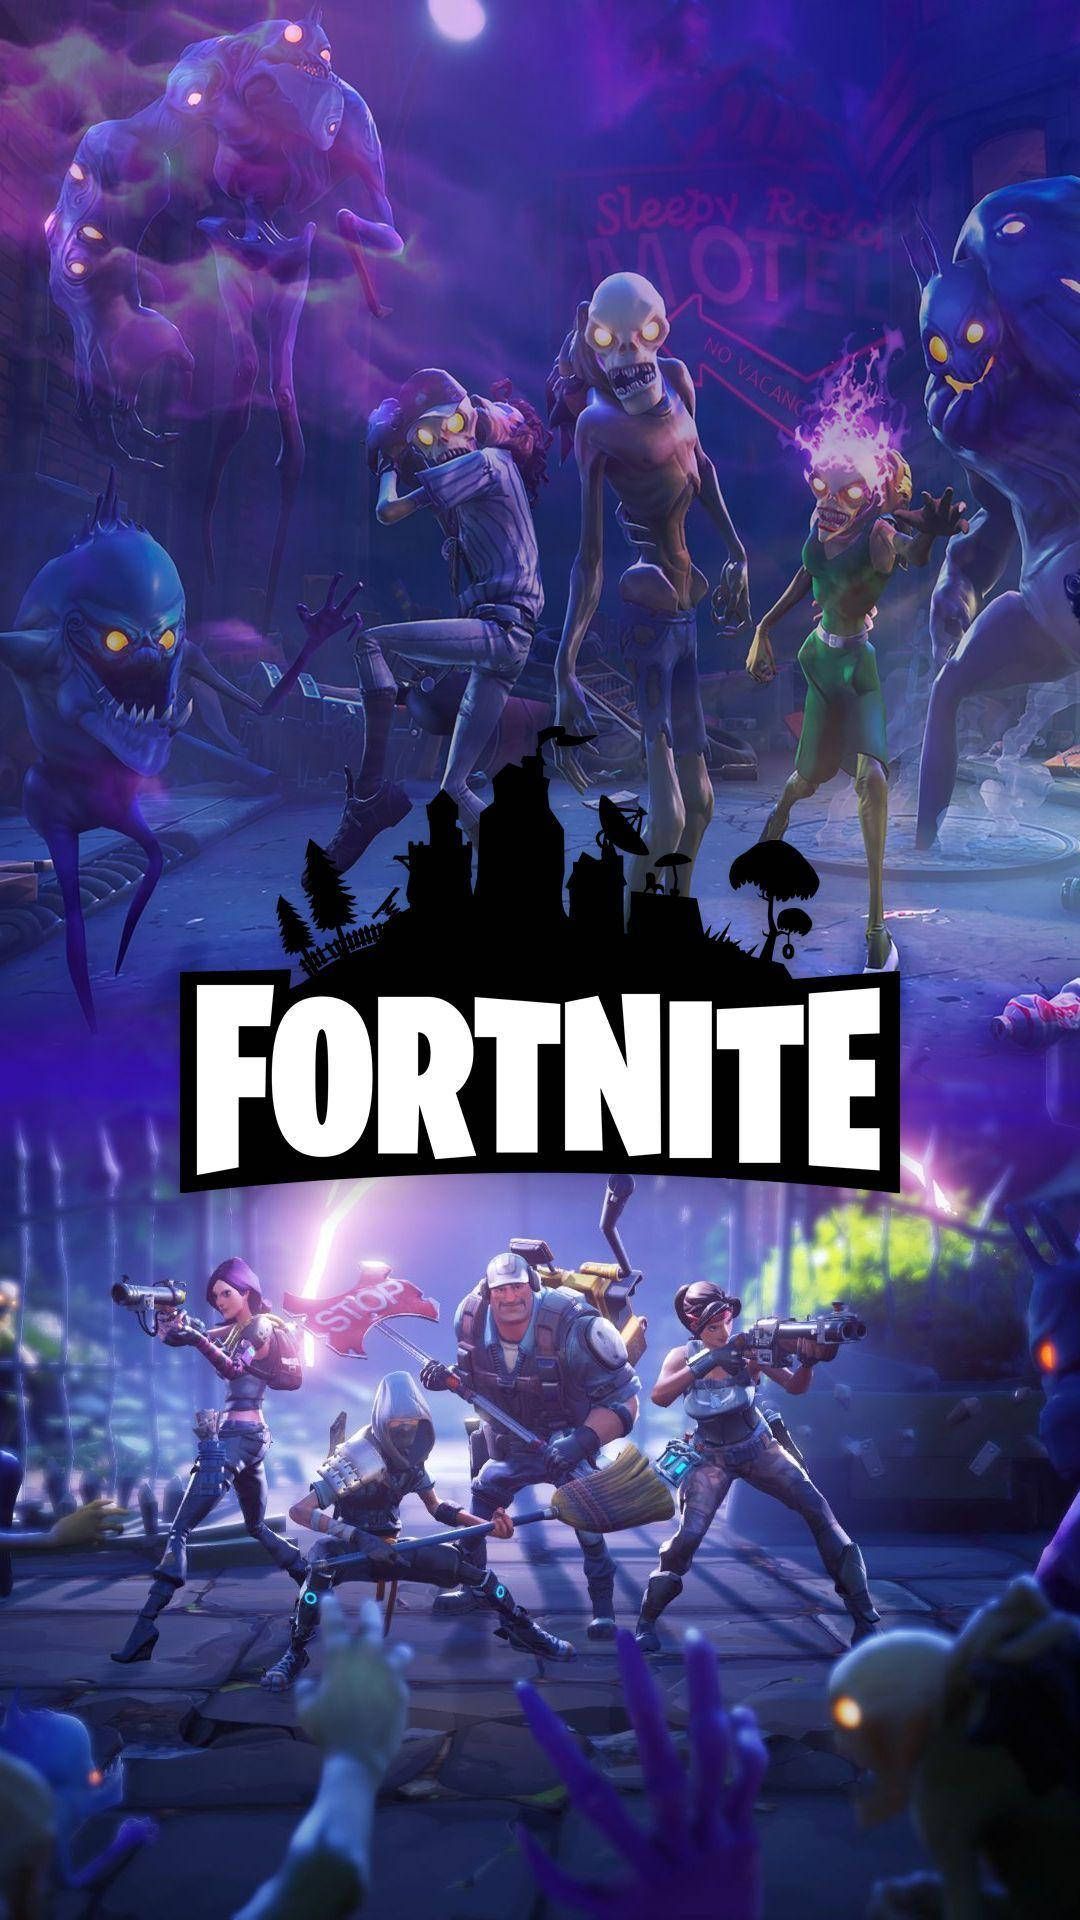 Fortnite Mobile Wallpaper with high-resolution 1080x1920 pixel. You can use this wallpaper for your Windows and Mac OS computers as well as your Android and iPhone smartphones - Fortnite